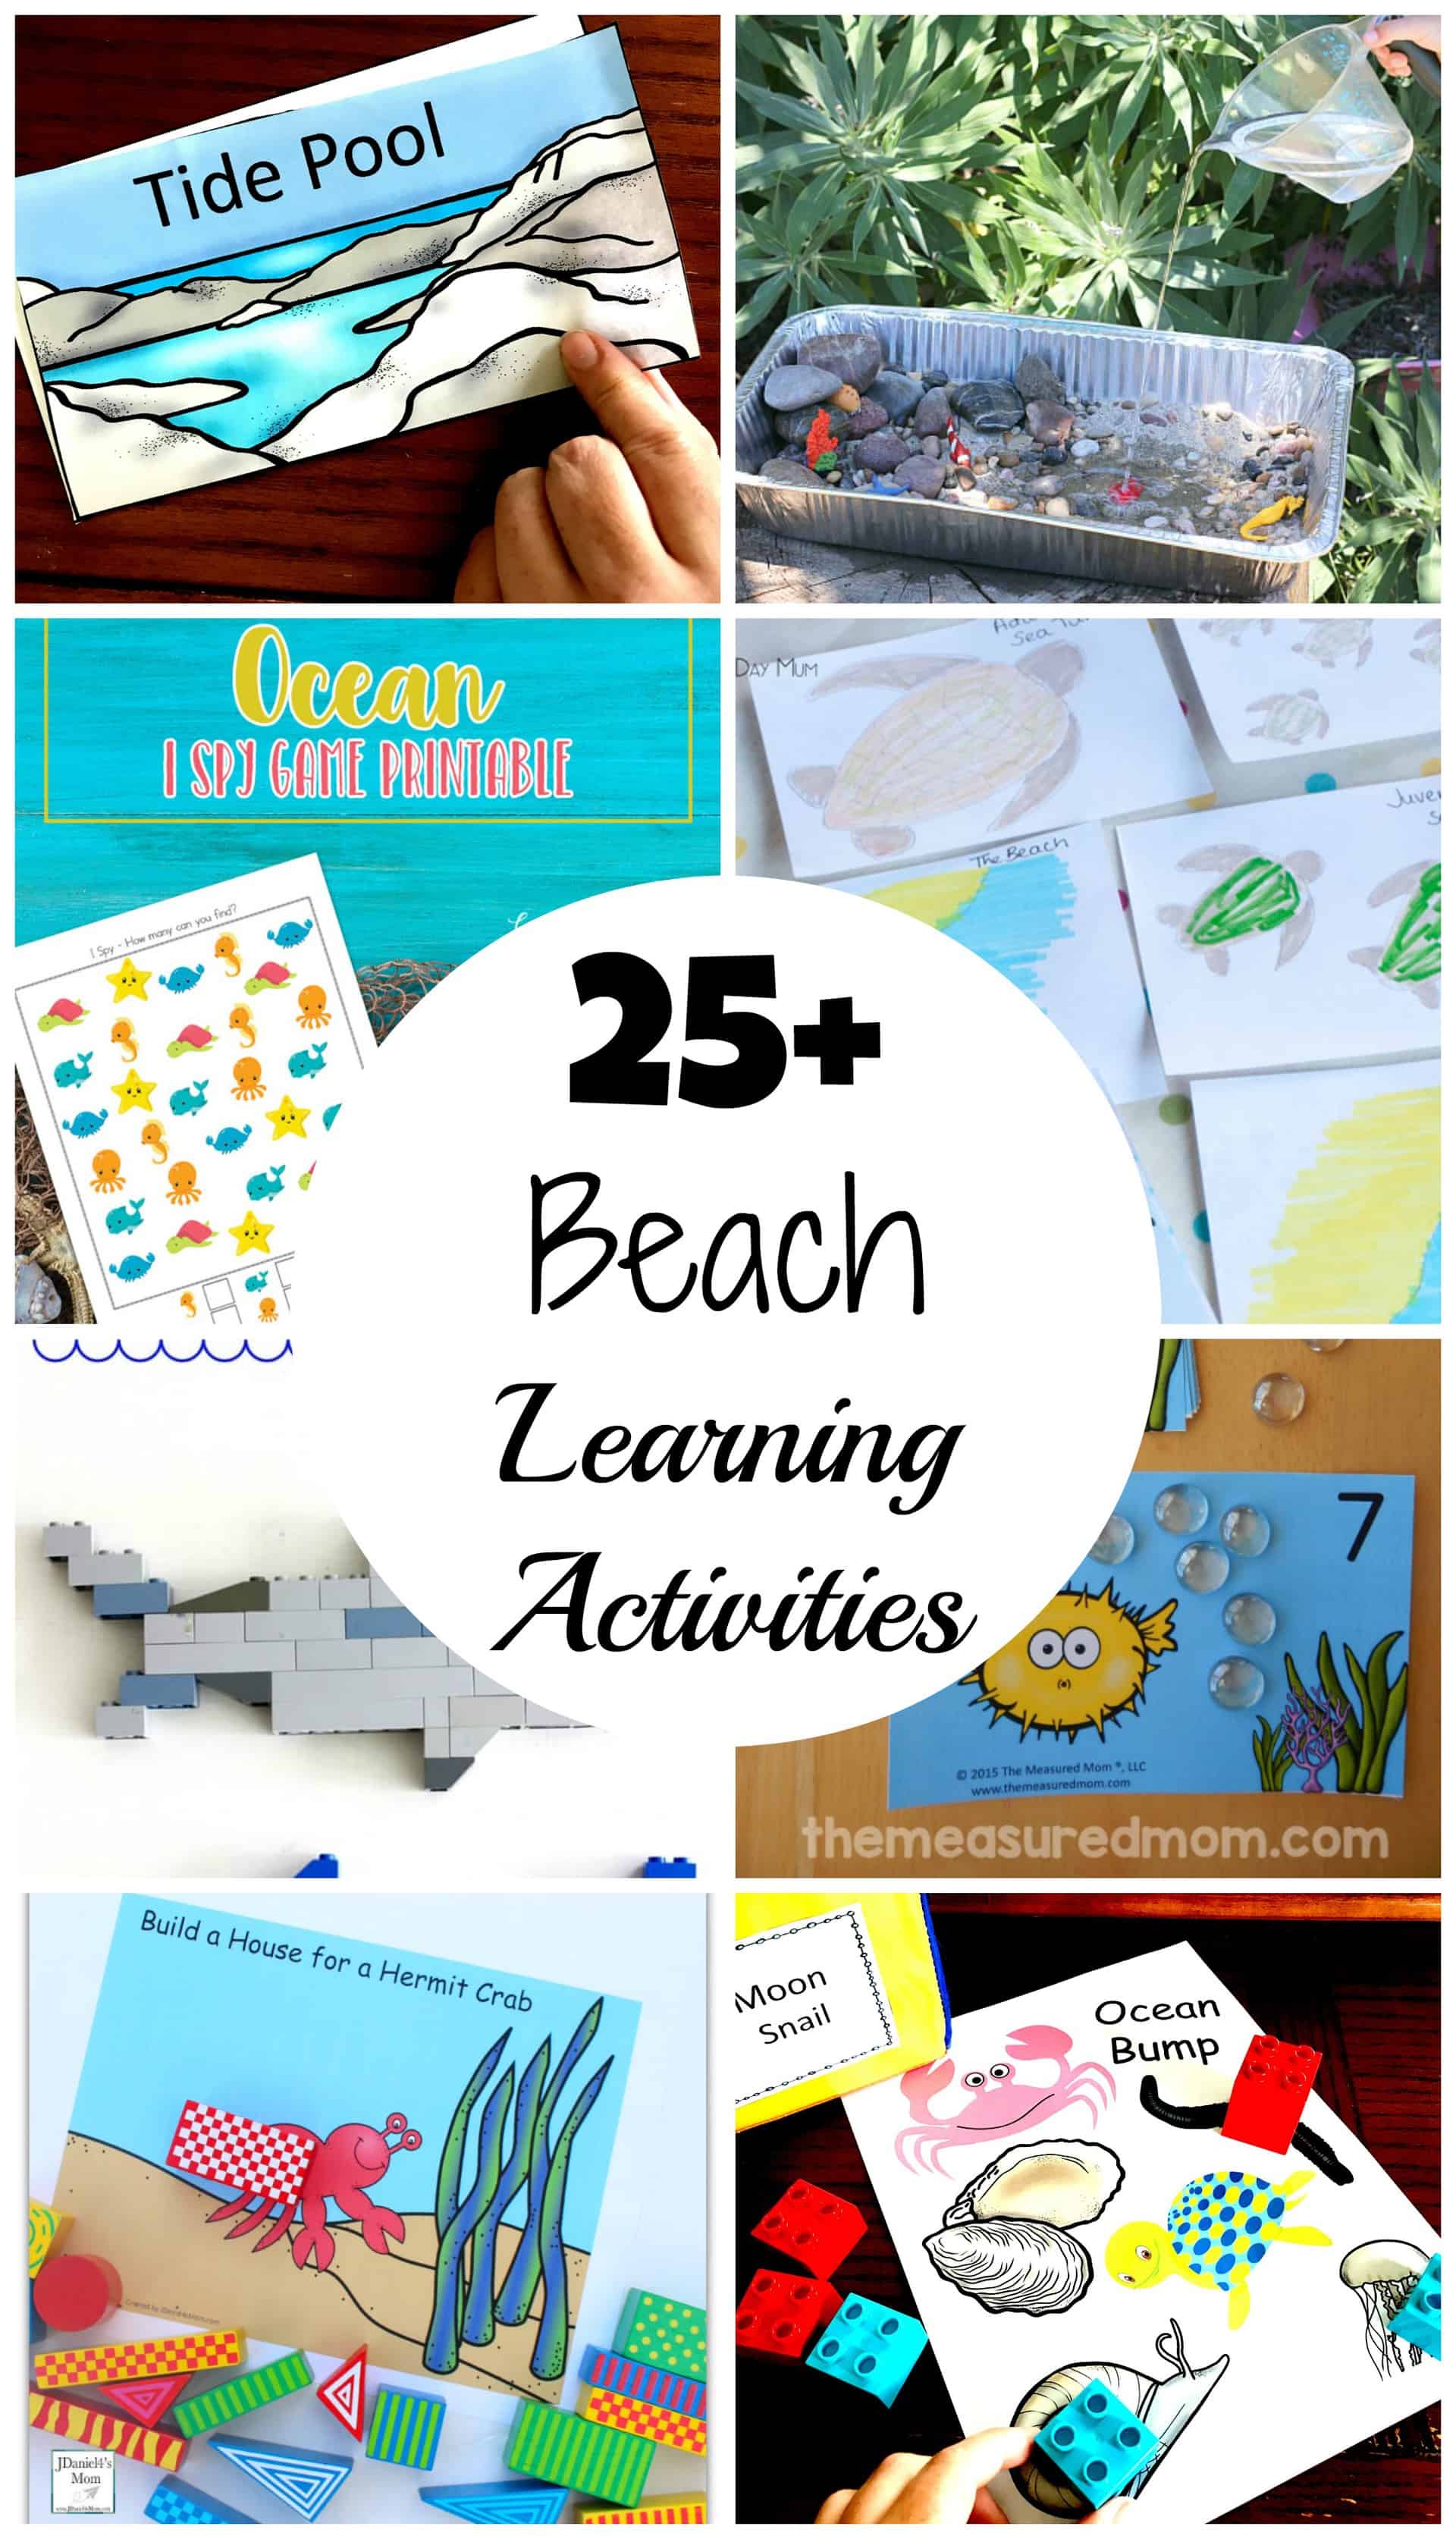 25+ Beach Learning Activities to Build Background Knowledge Before Your Beach Trip